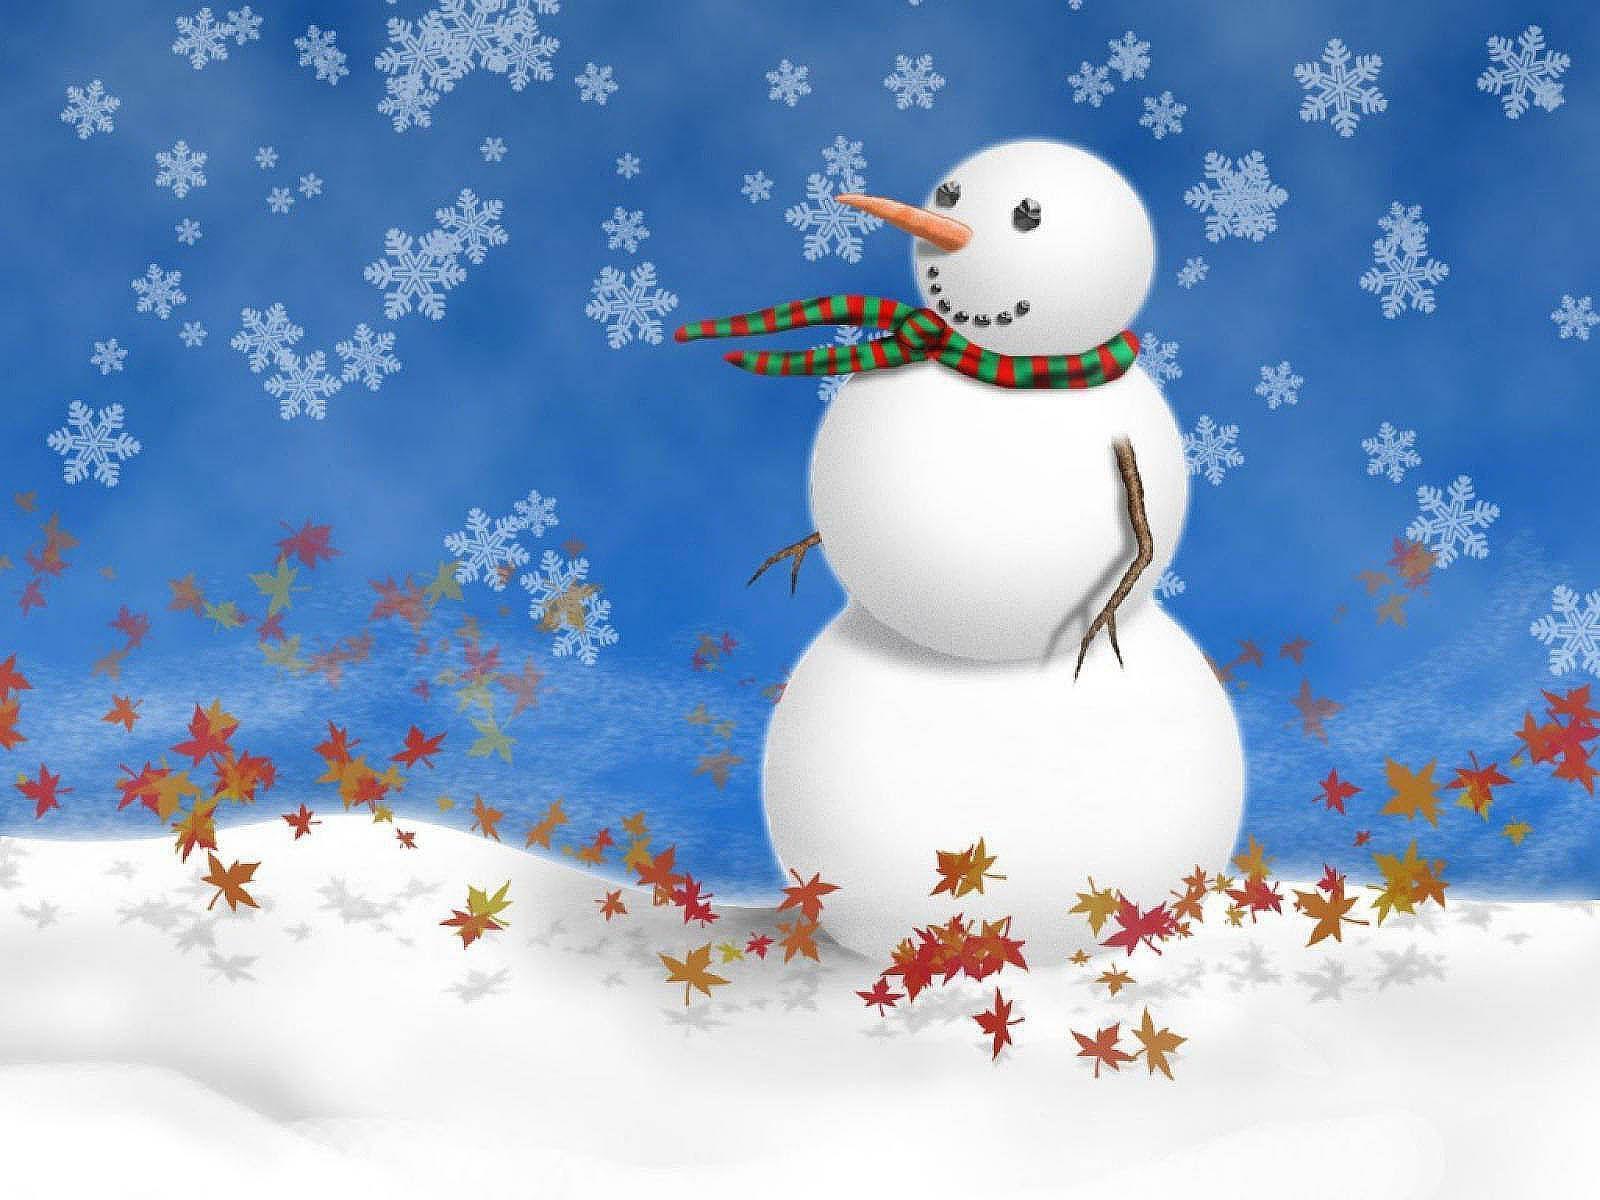 wallpapers: Snowman Desktop Wallpapers and Backgrounds